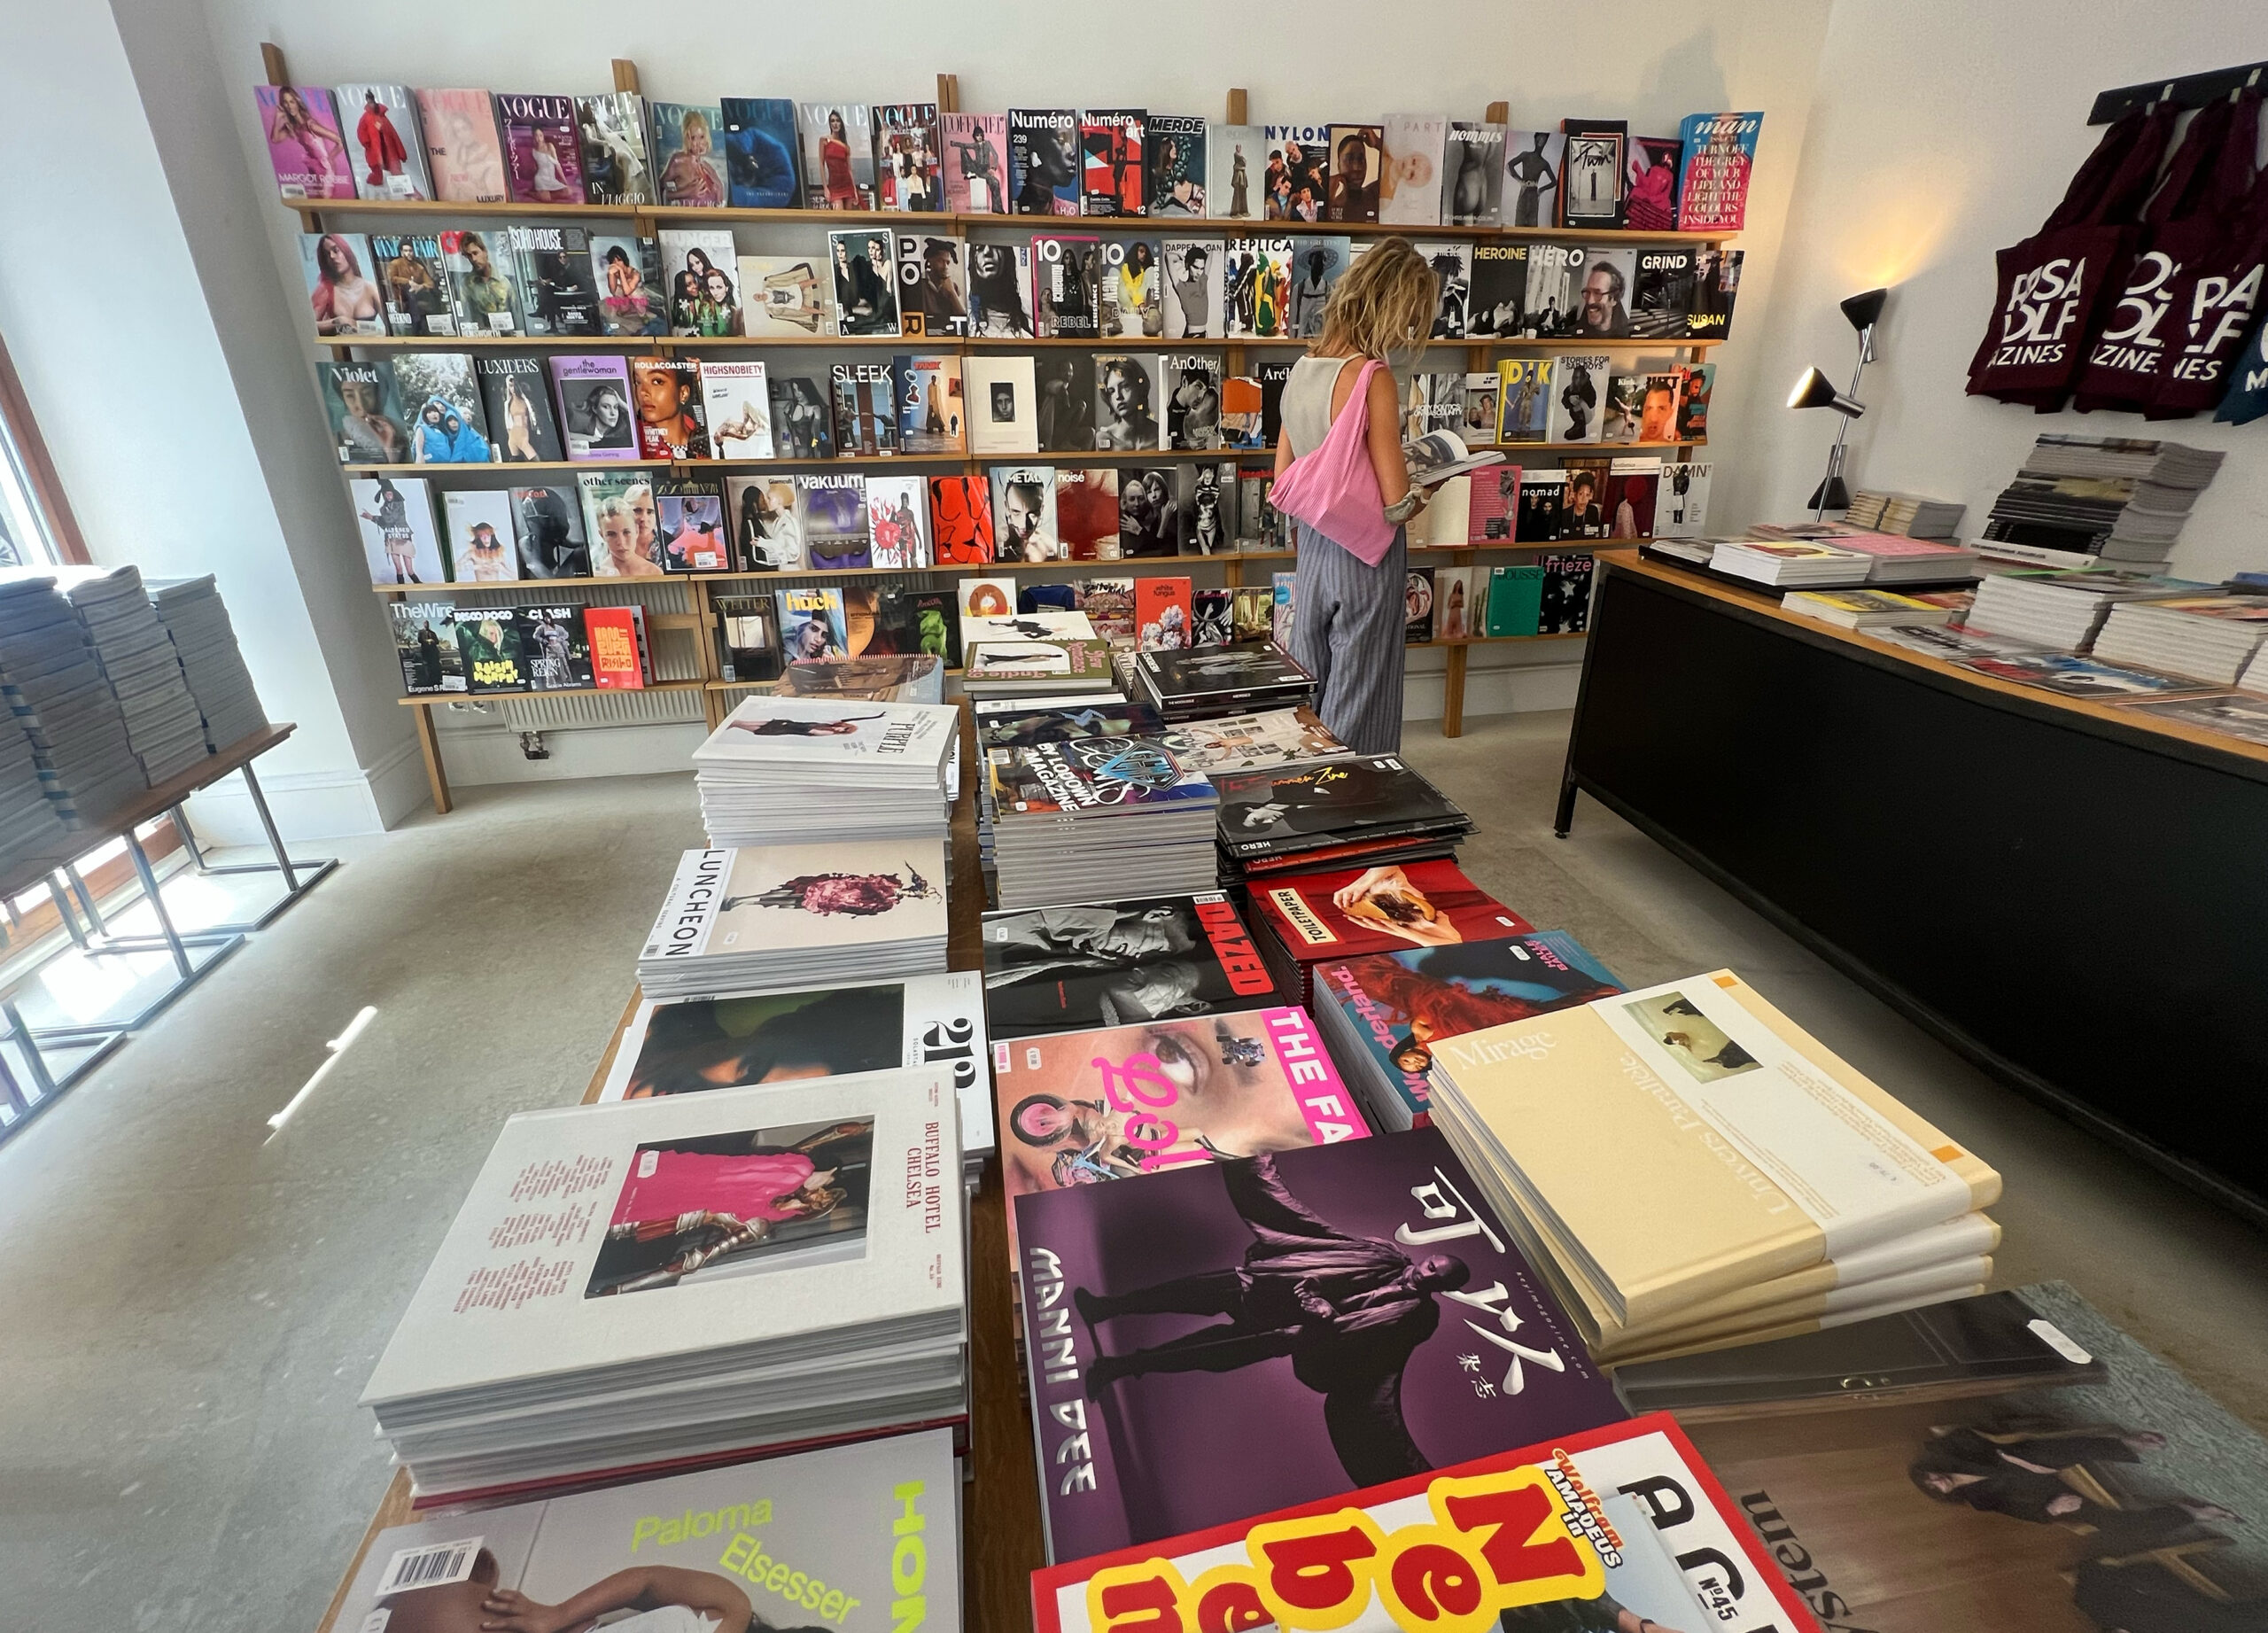 The best independent magazine shops and bookstores in the world